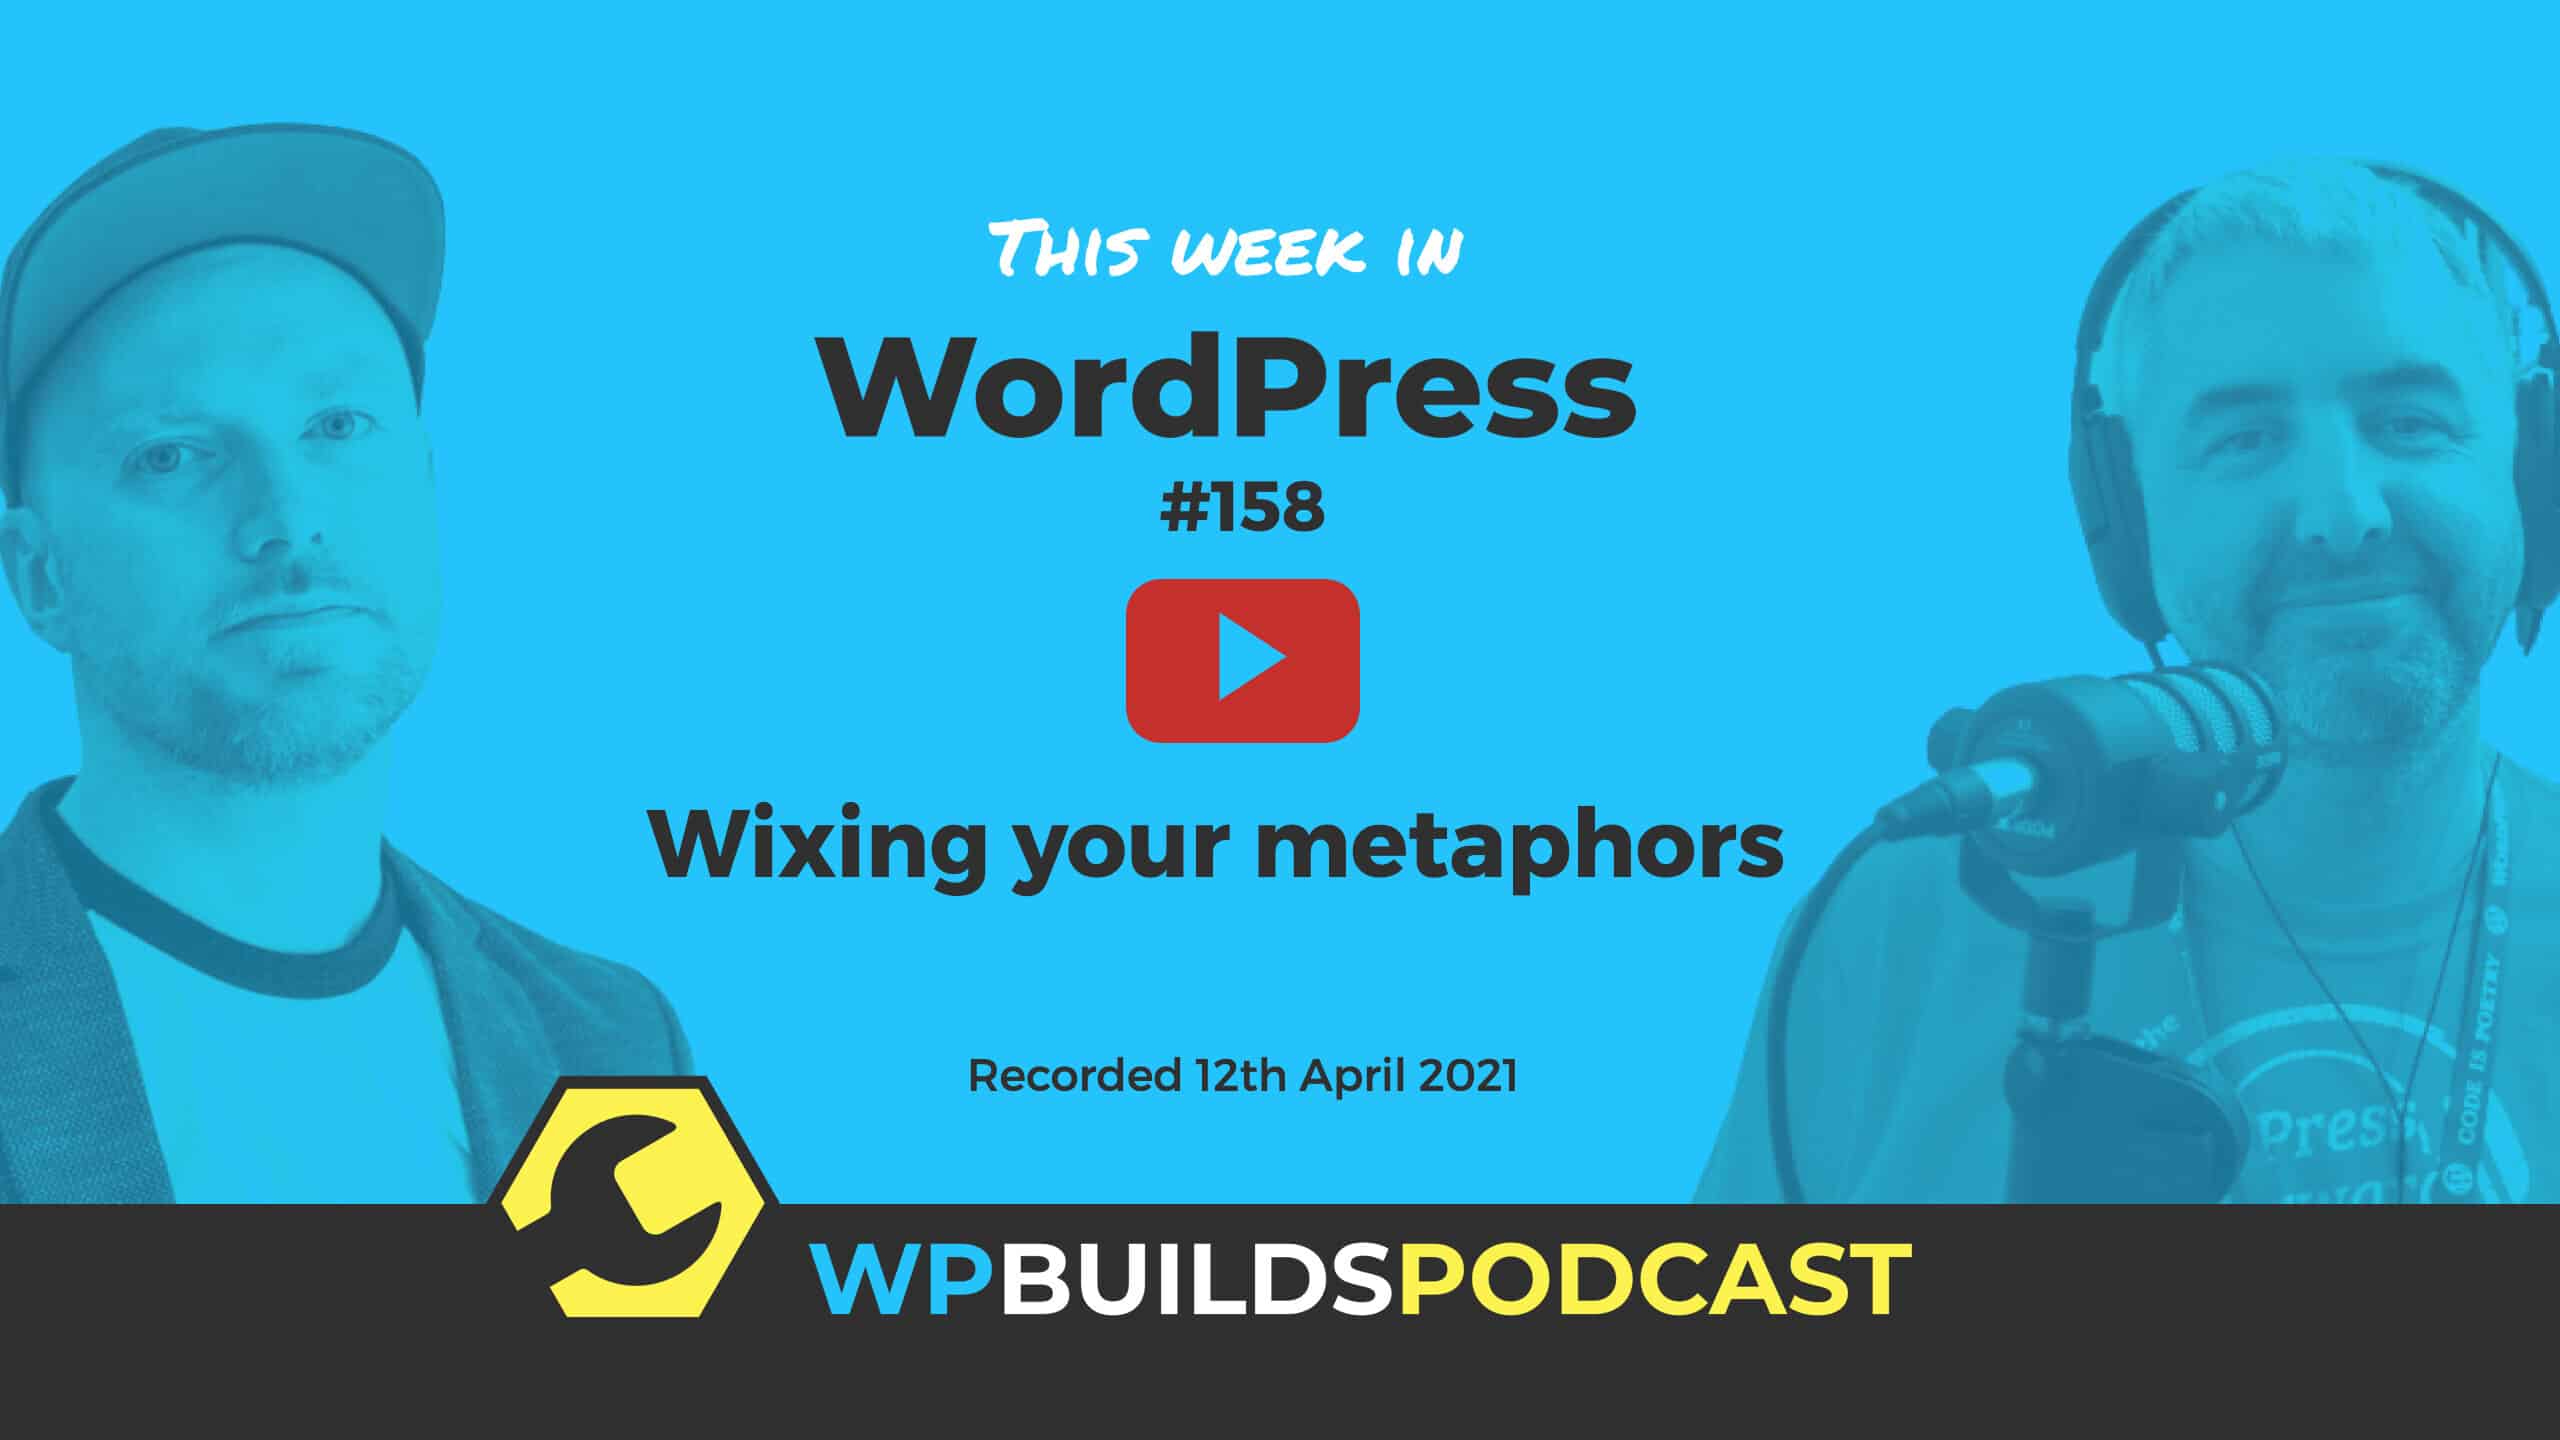 This Week in WordPress #158 - from WP Builds